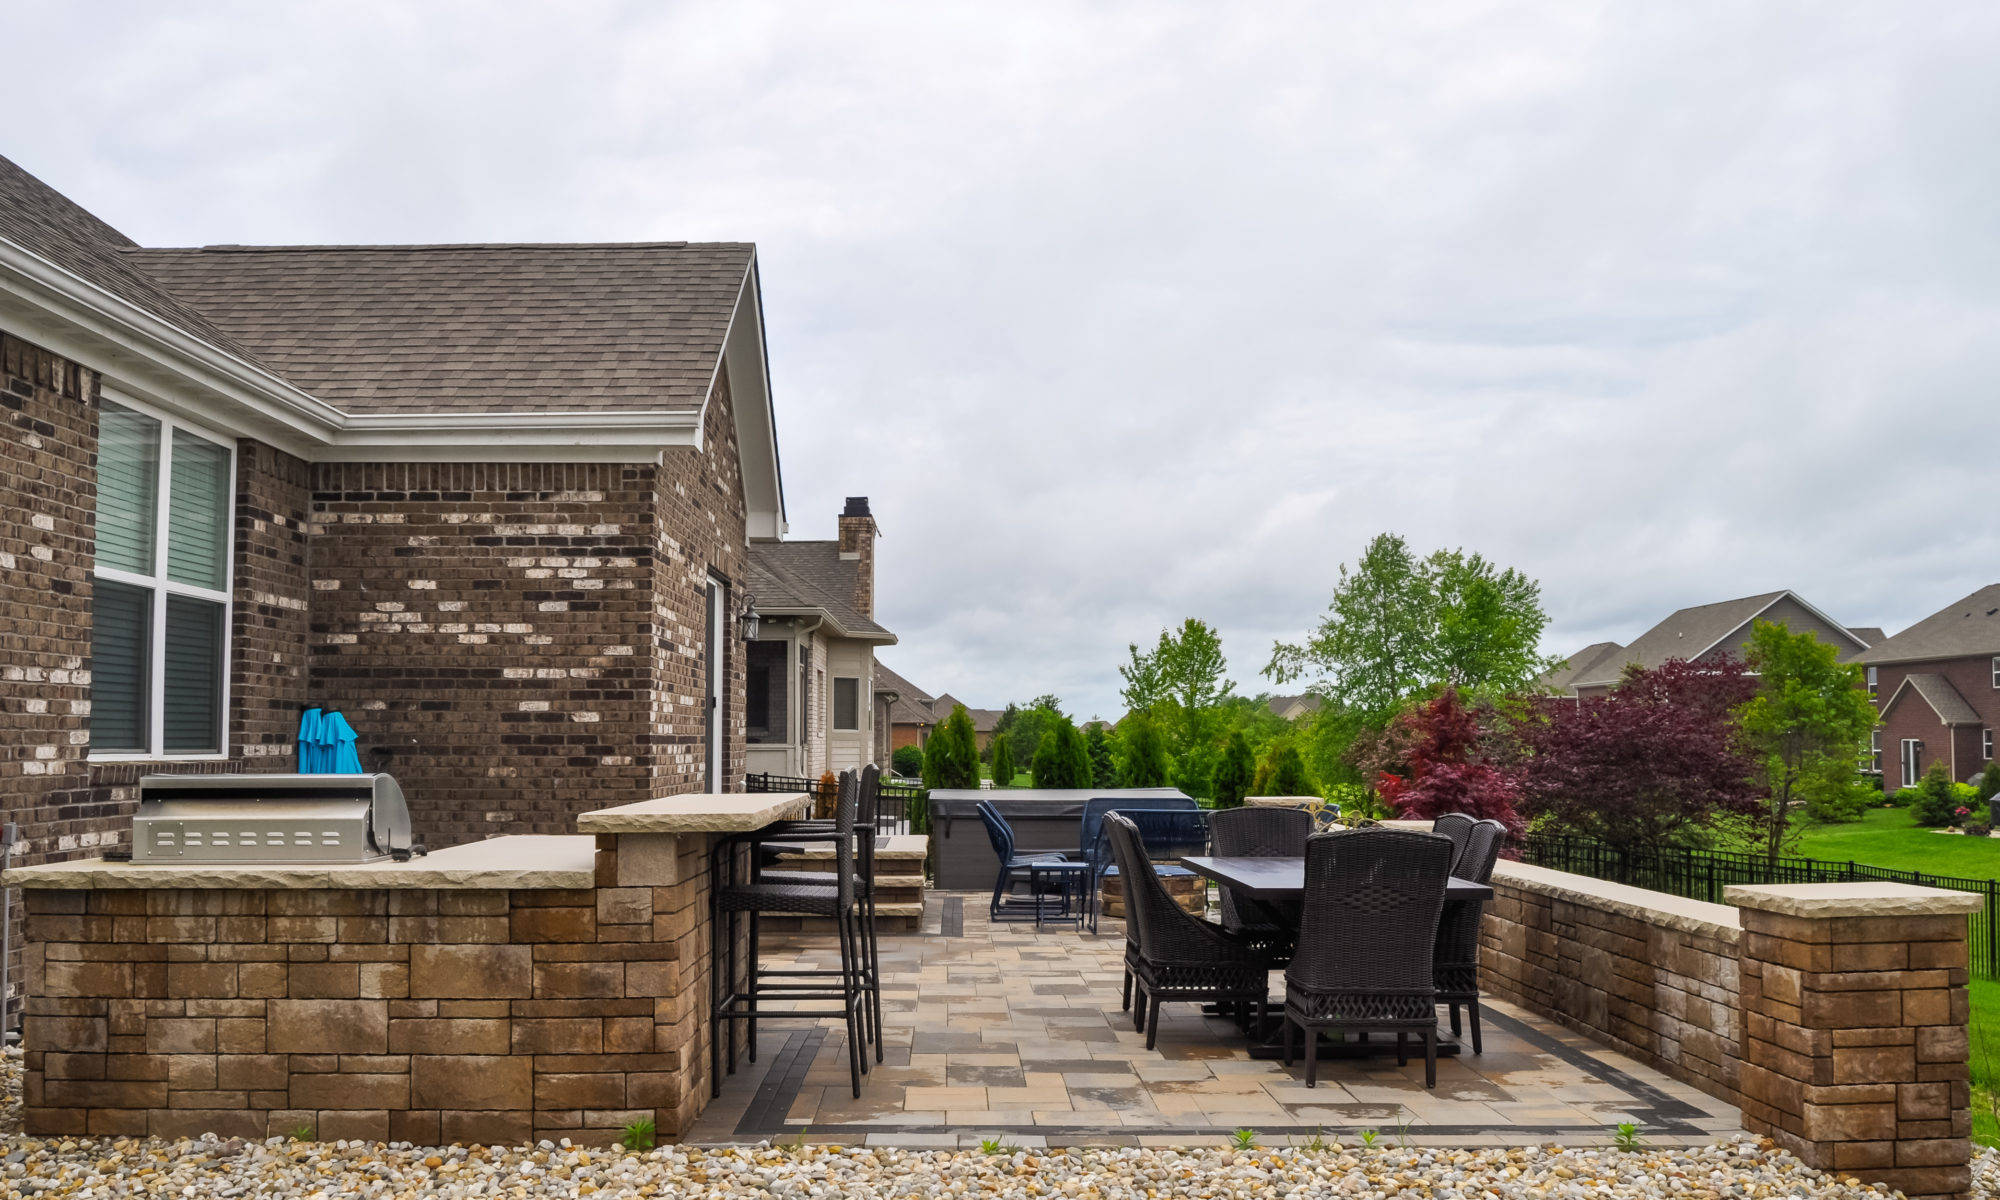 Precision Outdoors Center Grove grill paver patio & retaining wall builtin built-in outdoor kitchen extended bar seating hang out gathering paver patio belgard moduline paver material retaining wall kitchen veneer Ashlar tandem backyard landscaping rock bed trees bulbs shrubs entertaining space